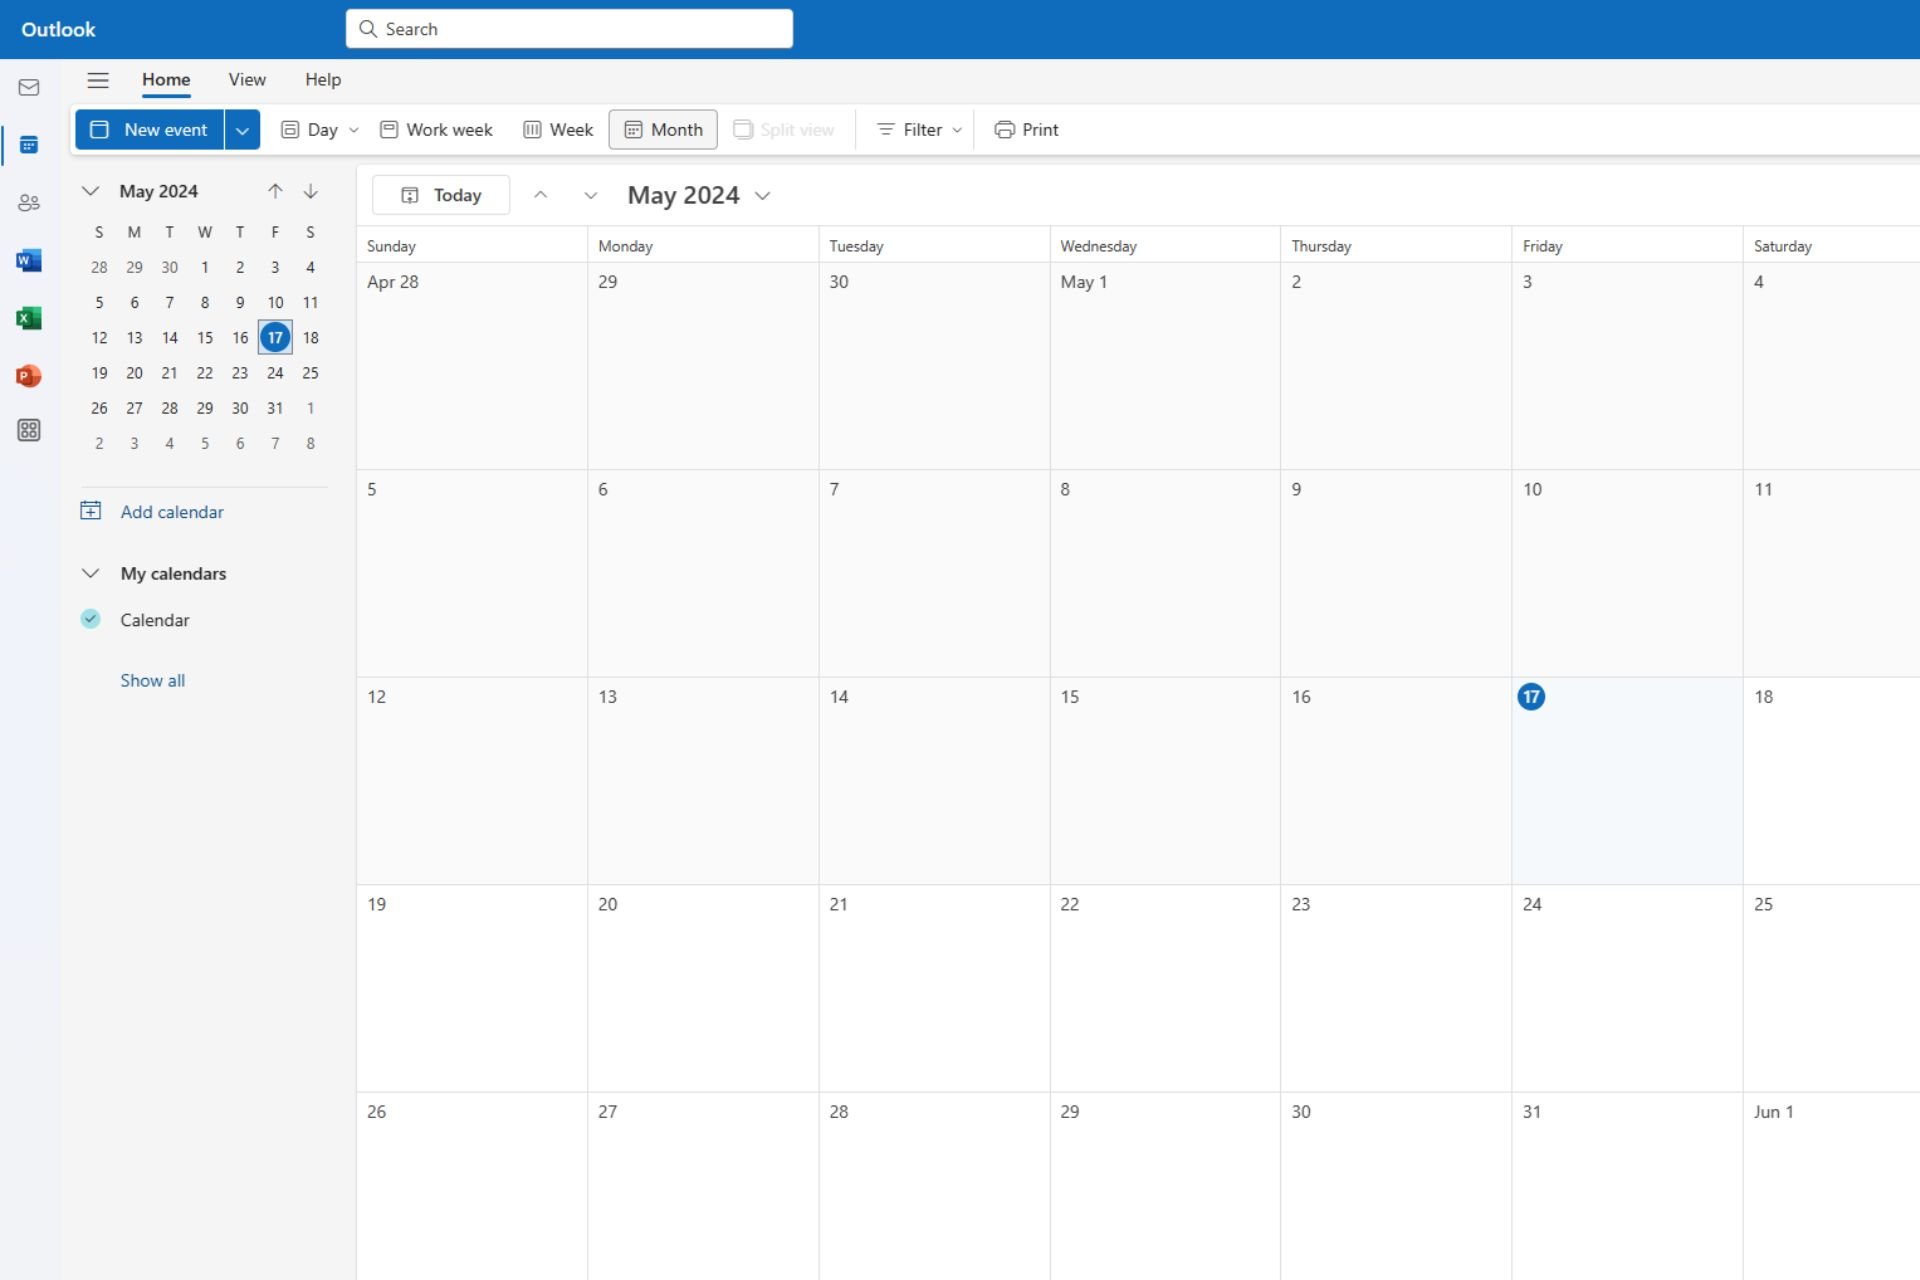 Outlook will introduce Split View, allowing users to manage multiple calendars at once